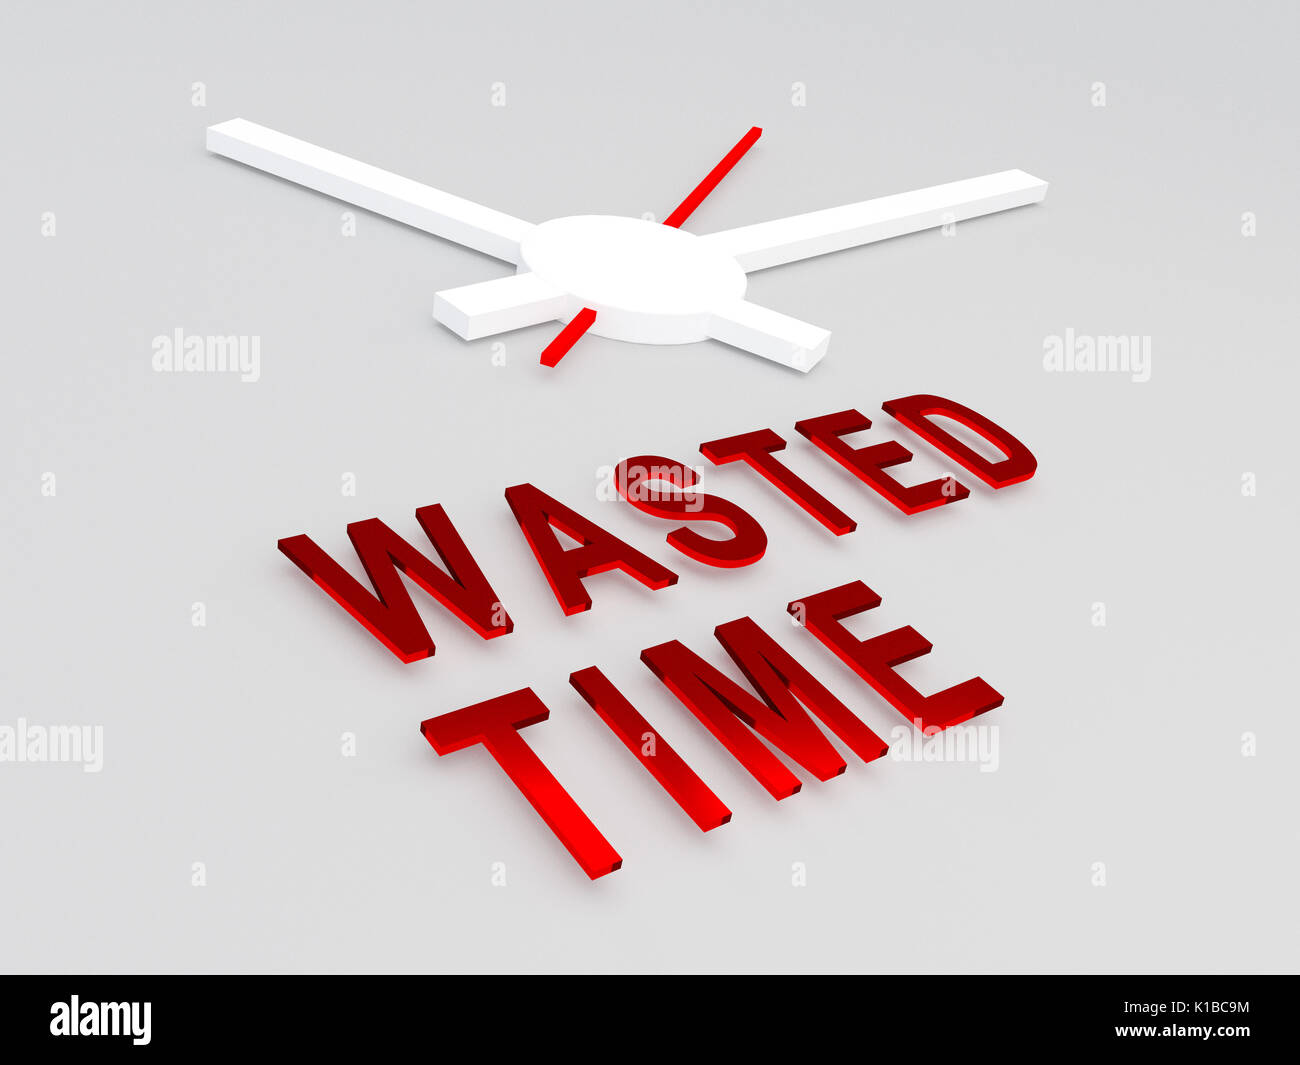 3D illustration of 'WASTED TIME' title with a clock as a background. Time concept. Stock Photo